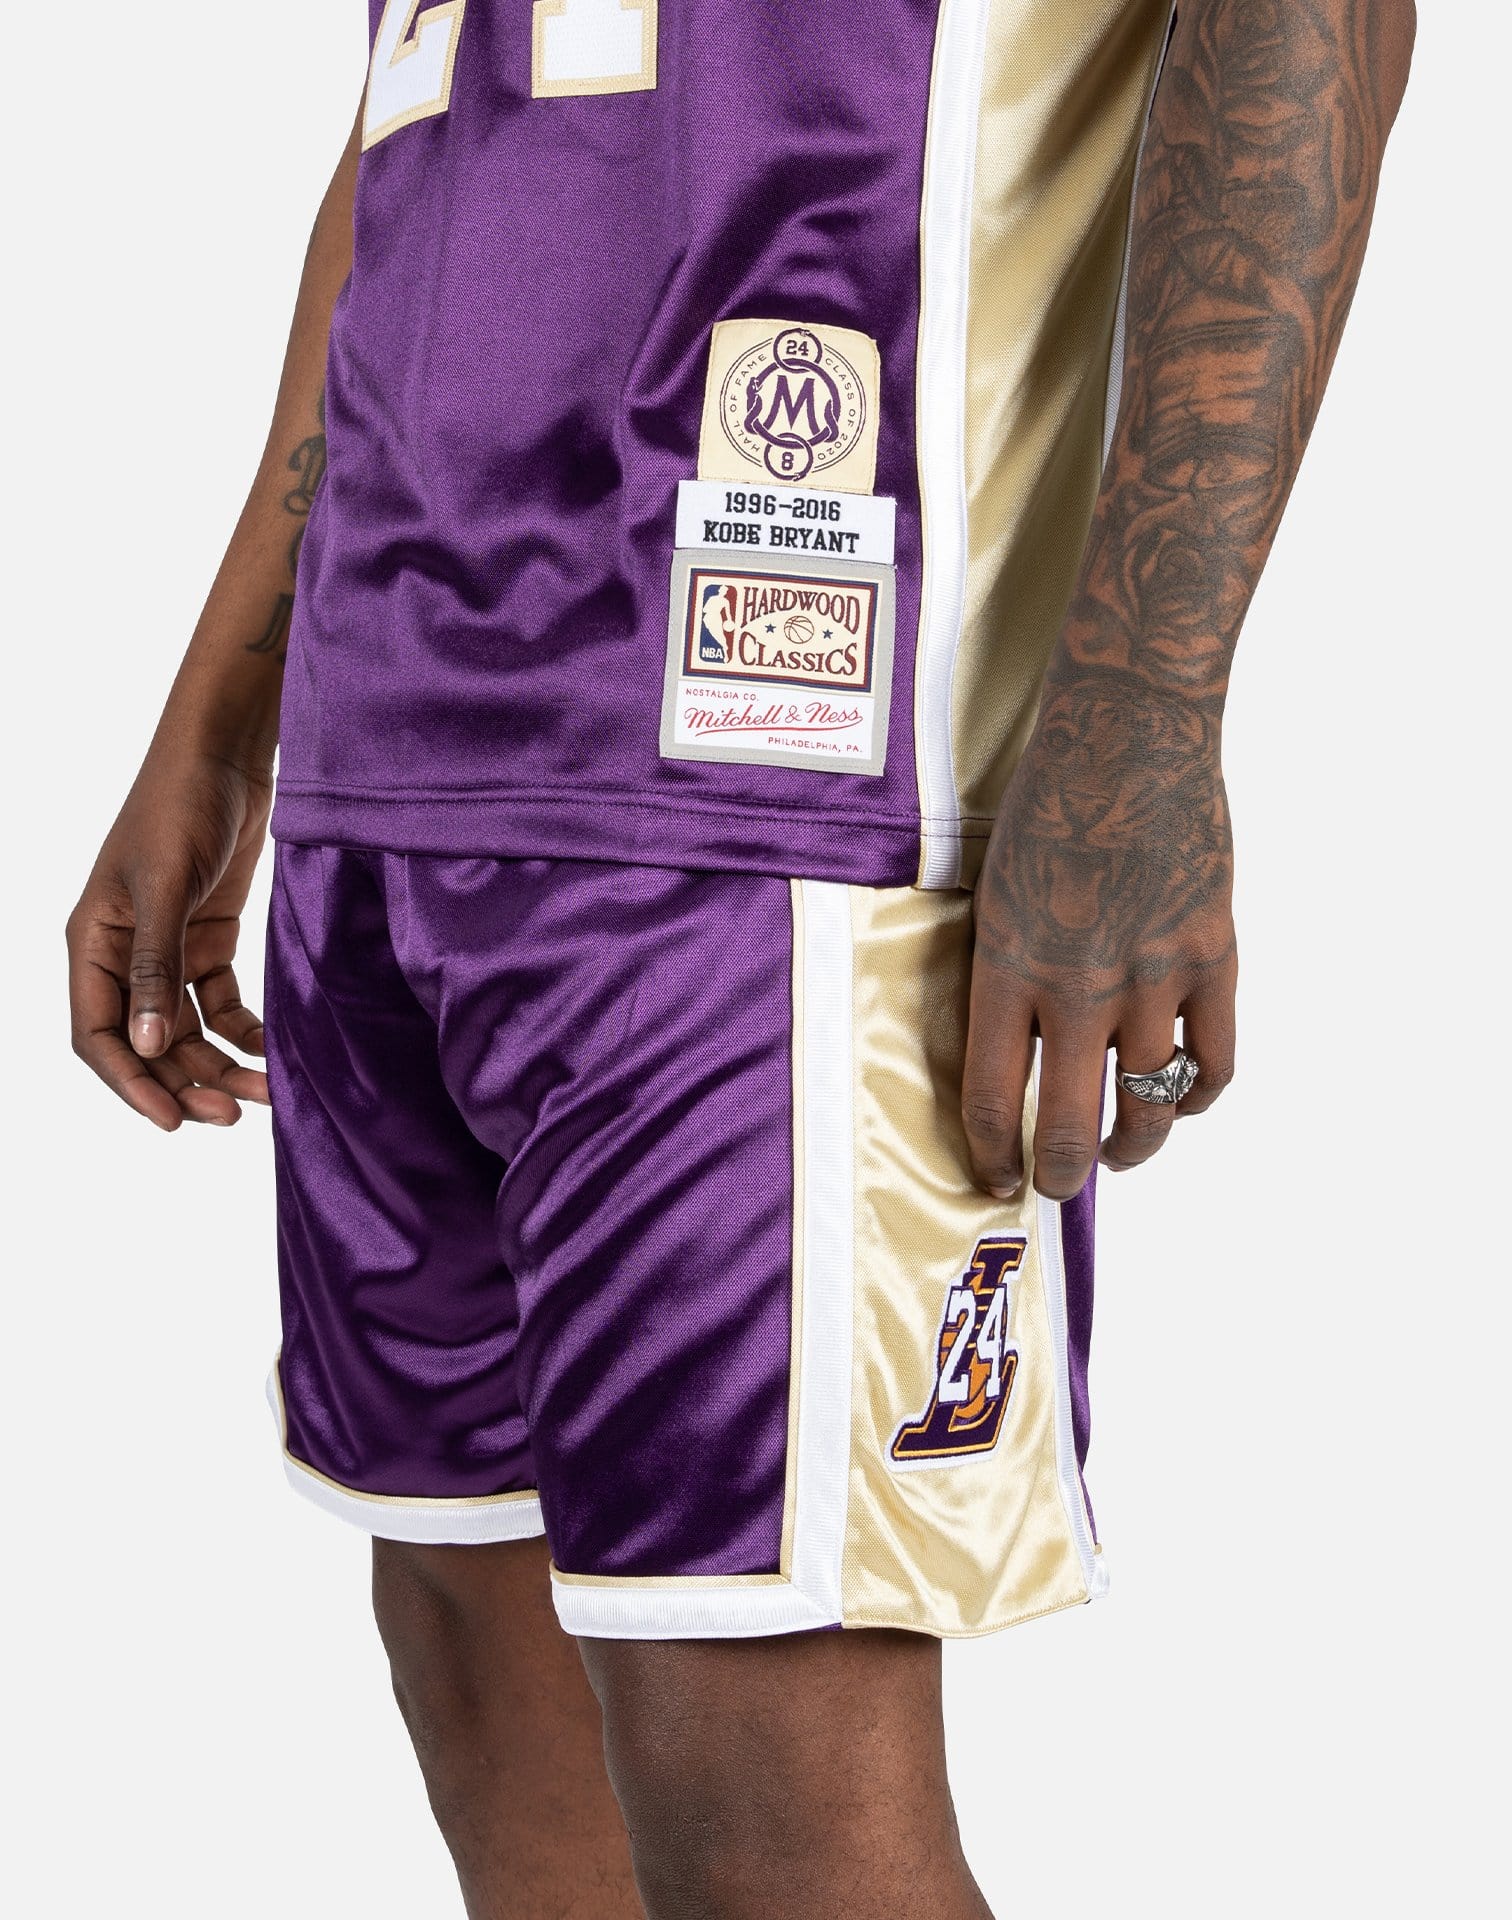 Nearly 50% OFF the Mitchell & Ness Kobe Bryant Hall of Fame